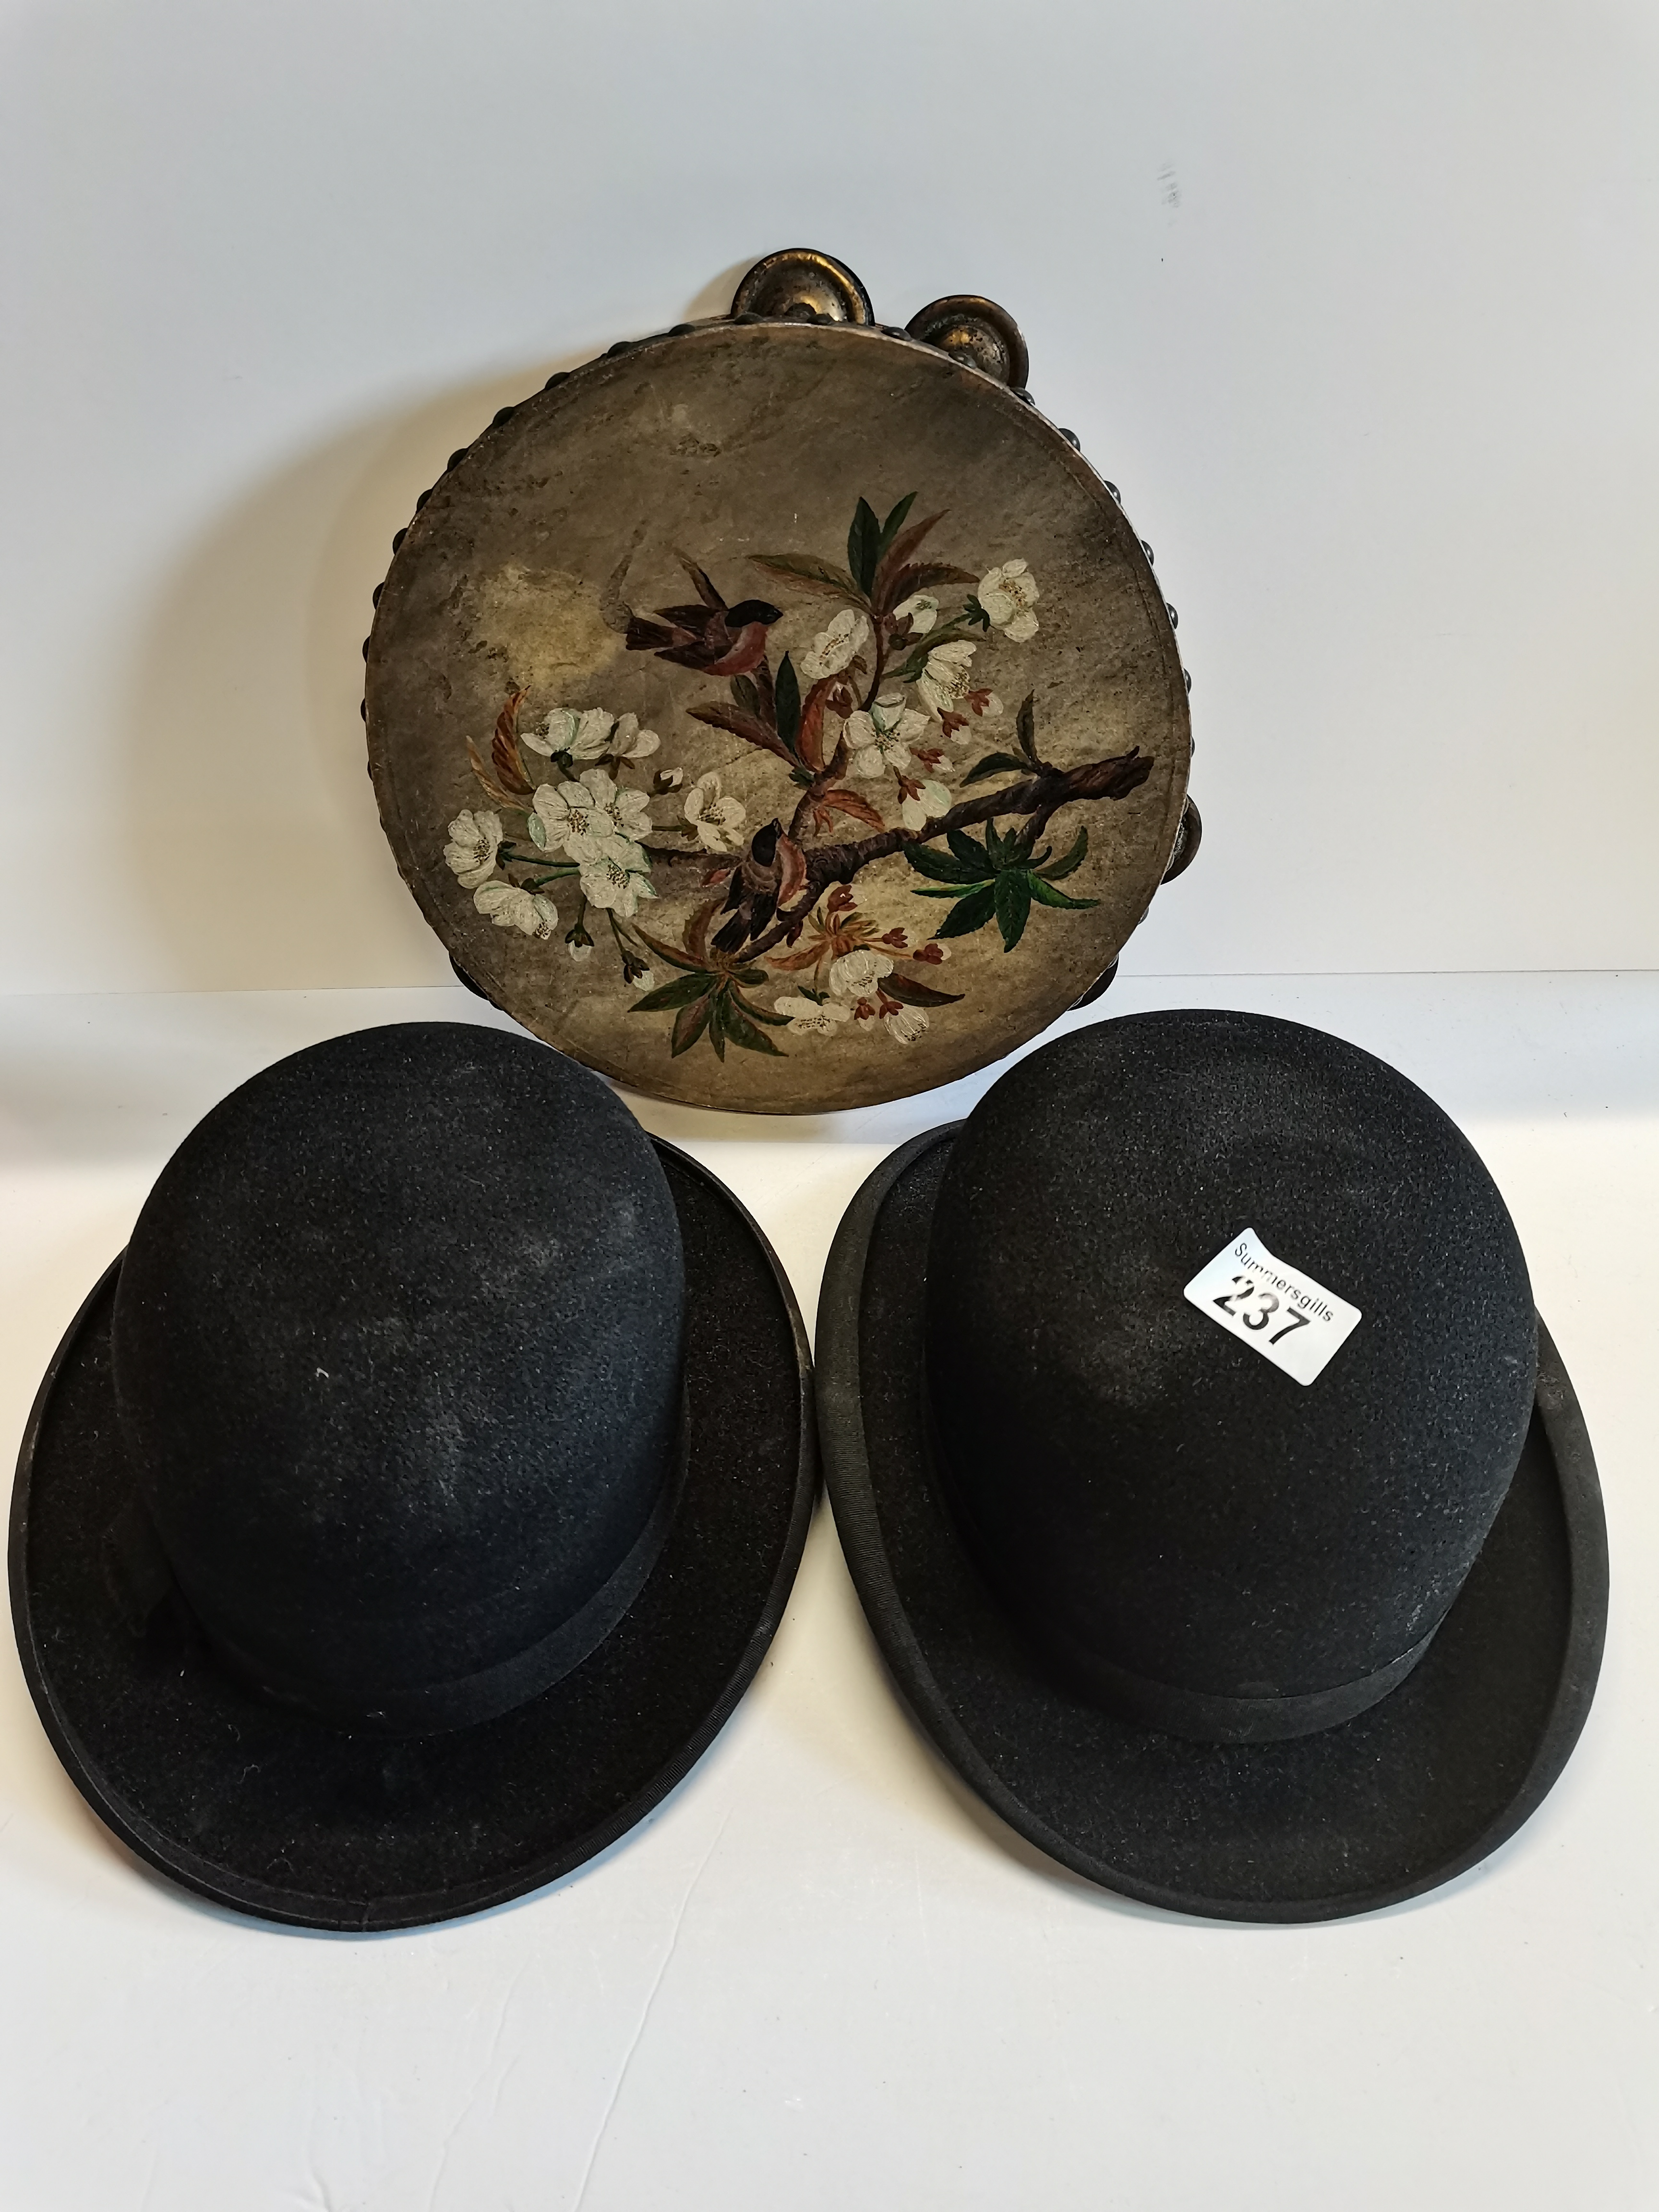 2 x bowler hats and vintage tambourine